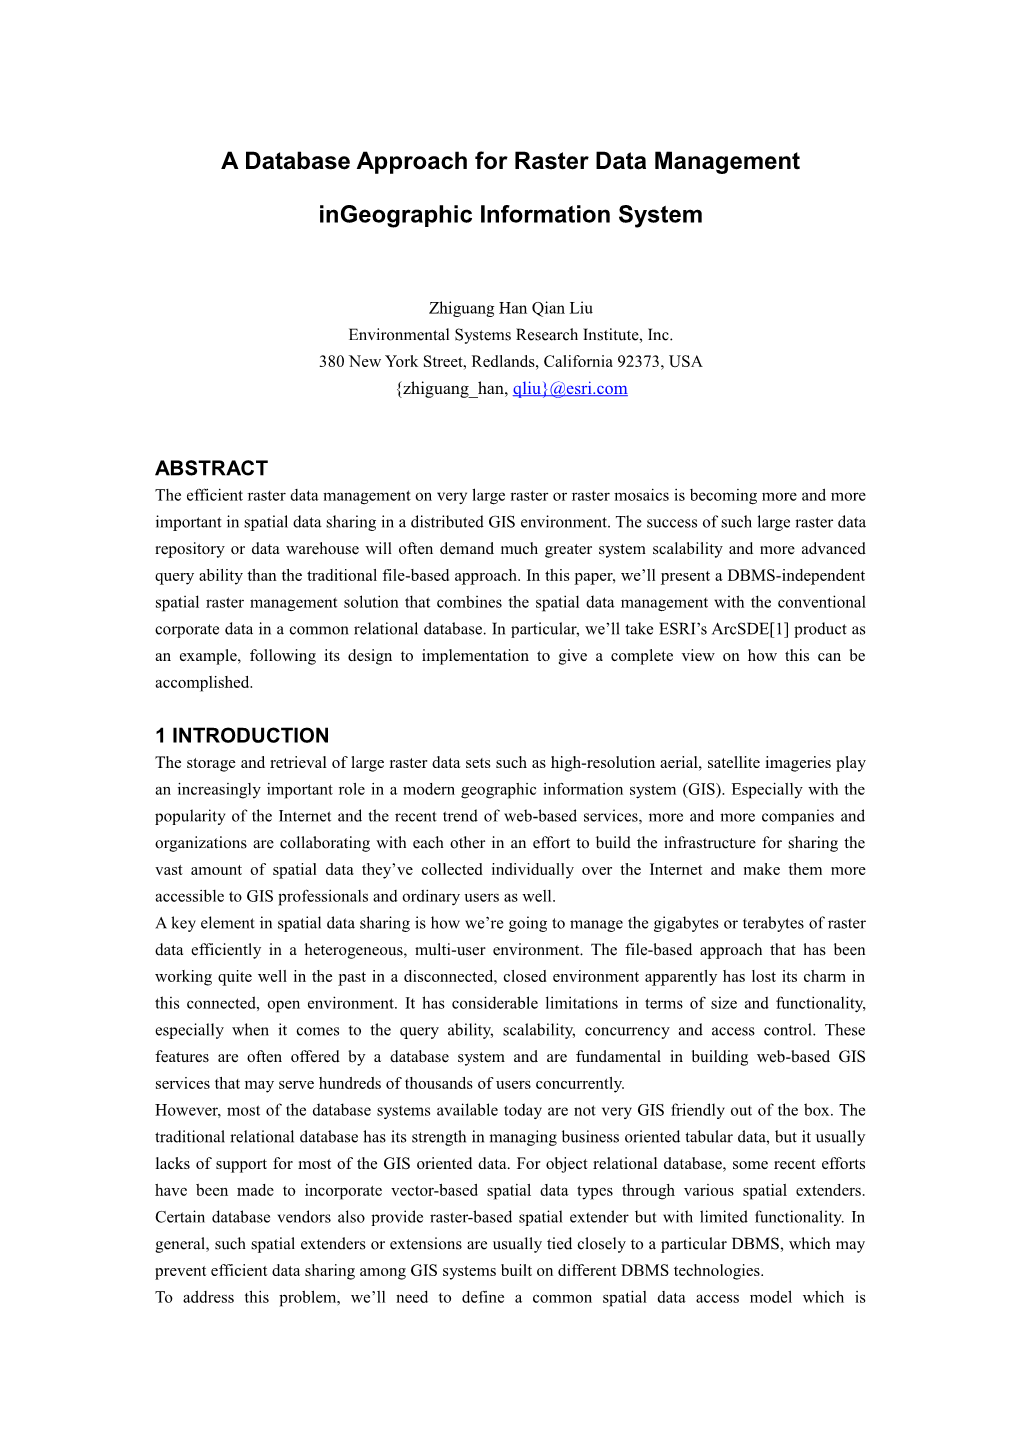 A Database Approach for Raster Data Management Ingeographic Information System